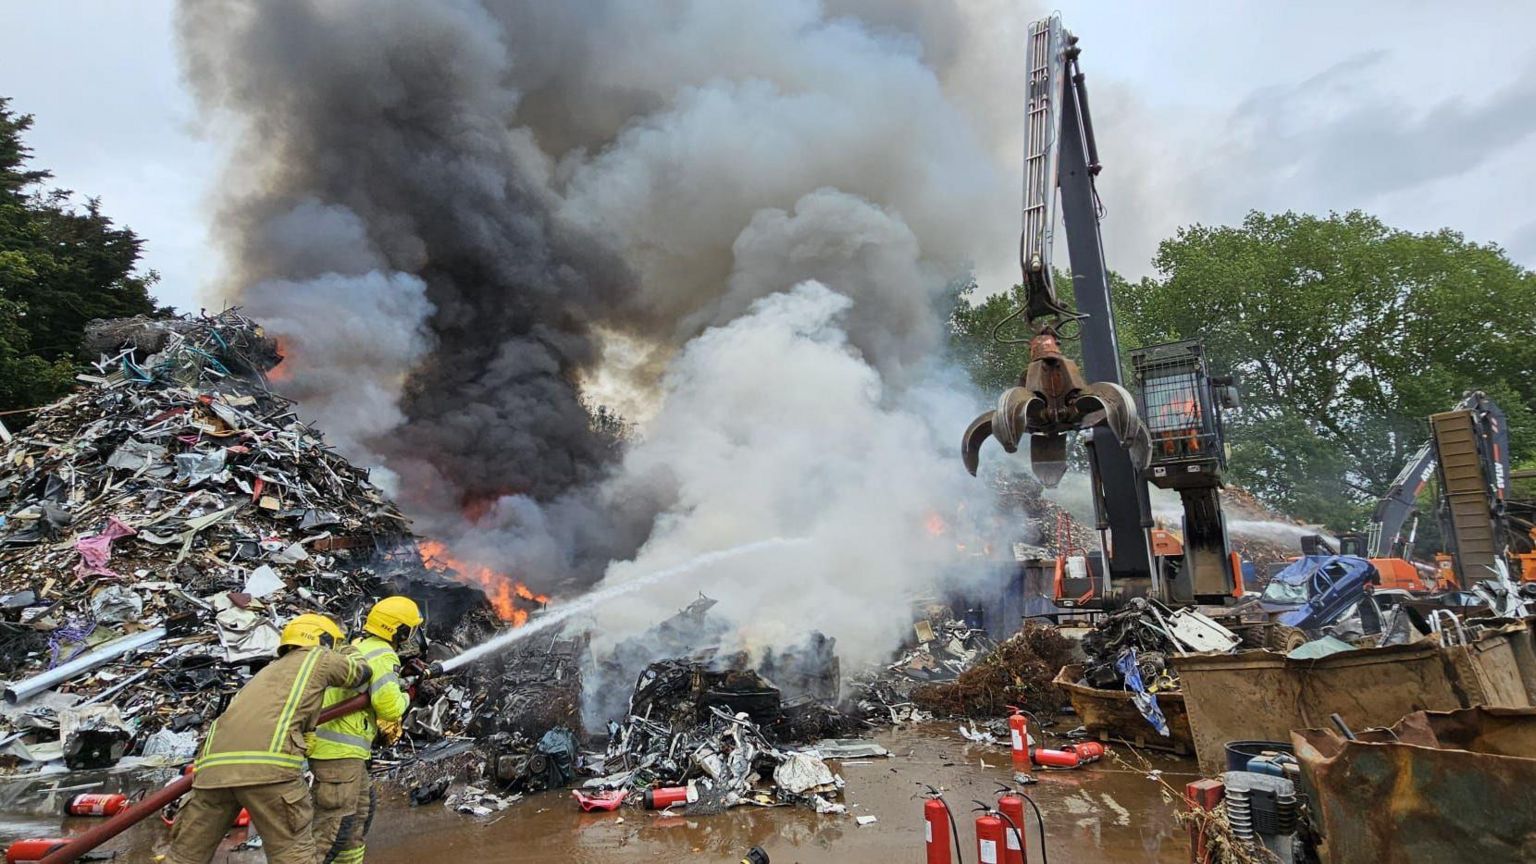 Two firefighters aim a hose at flames and smoke in a pile of scrap metal at John Huntley scrapyard